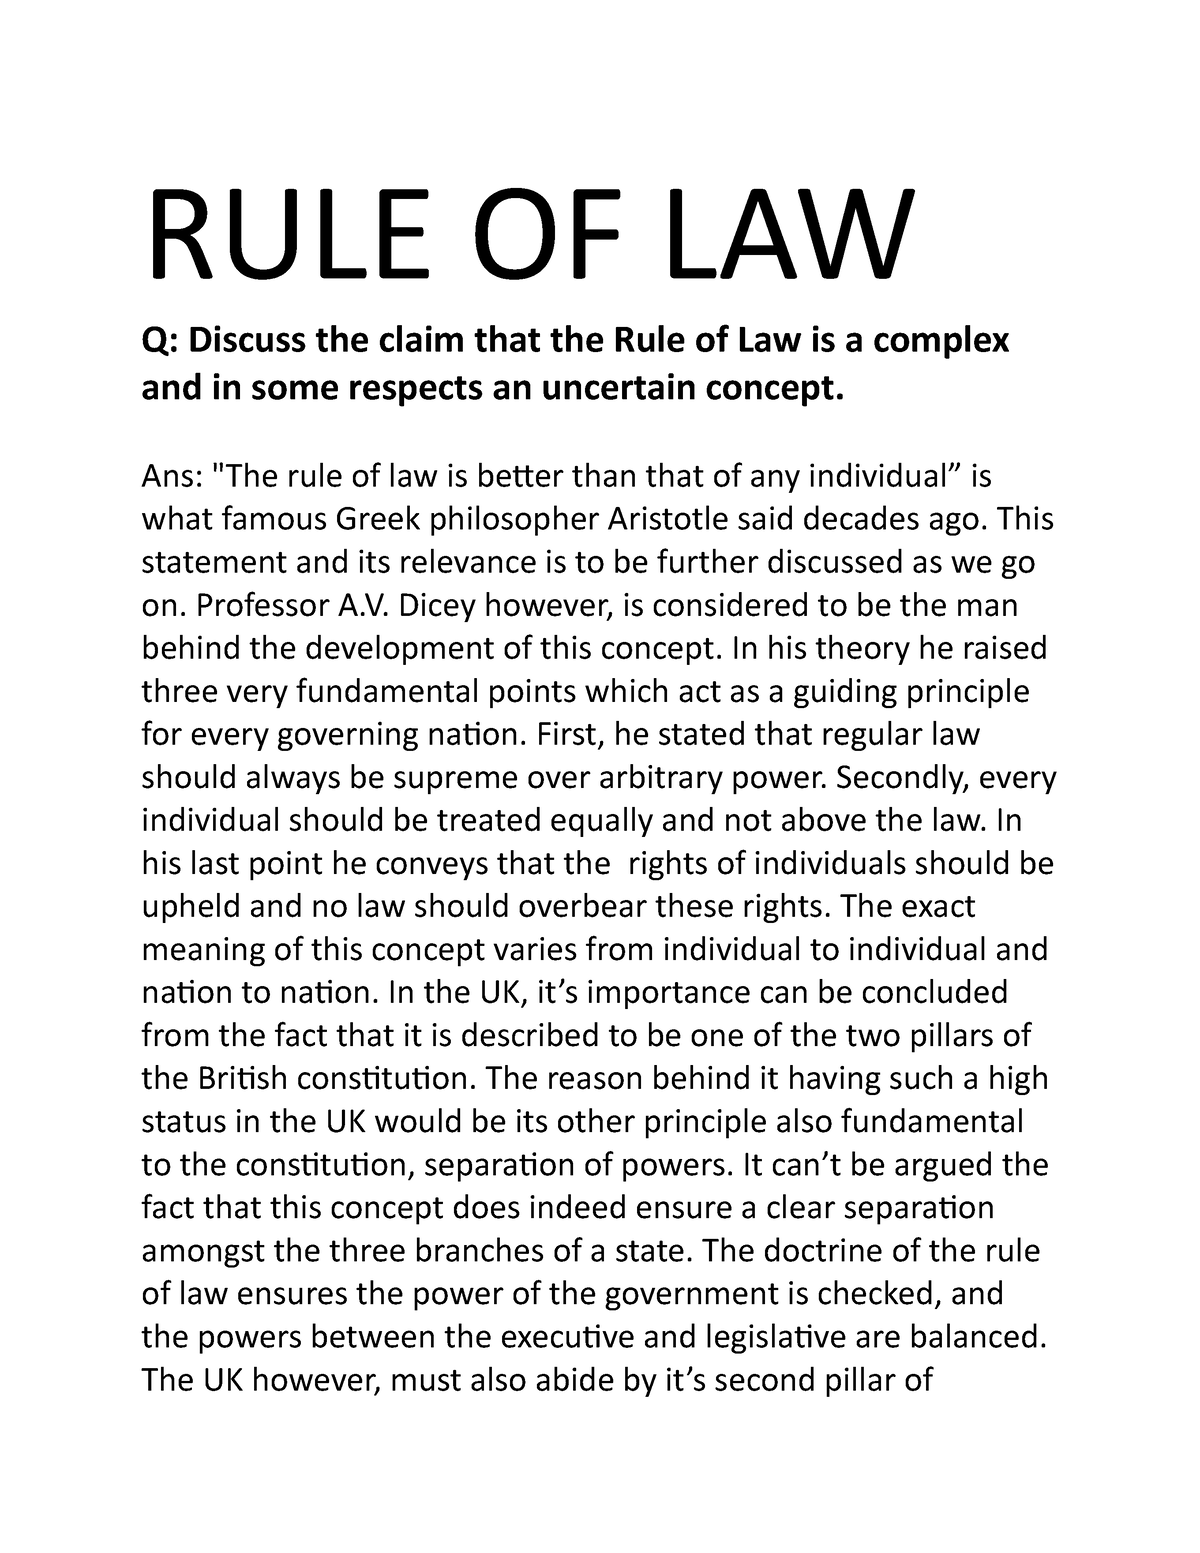 rule of law essay competition